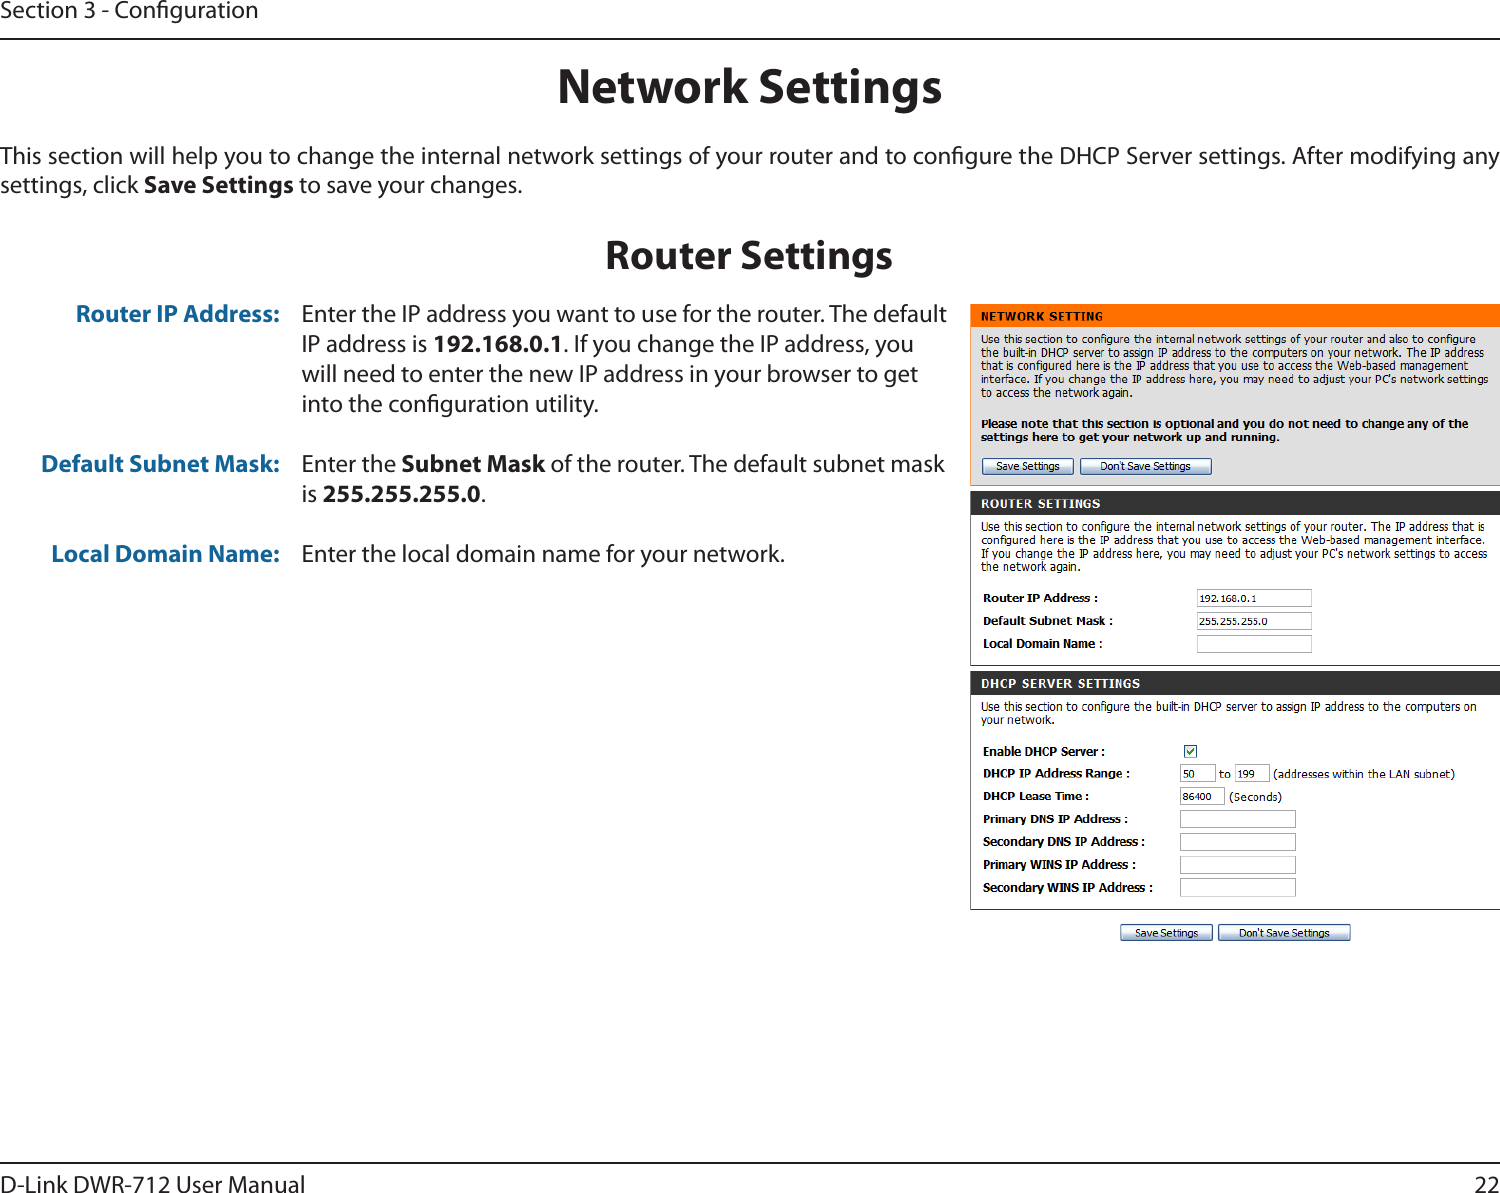 22D-Link DWR-712 User ManualSection 3 - CongurationThis section will help you to change the internal network settings of your router and to congure the DHCP Server settings. After modifying any settings, click Save Settings to save your changes.Network SettingsEnter the IP address you want to use for the router. The default IP address is 192.168.0.1. If you change the IP address, you will need to enter the new IP address in your browser to get into the conguration utility.Enter the Subnet Mask of the router. The default subnet mask is 255.255.255.0.Enter the local domain name for your network.Router IP Address:Default Subnet Mask: Local Domain Name: Router Settings